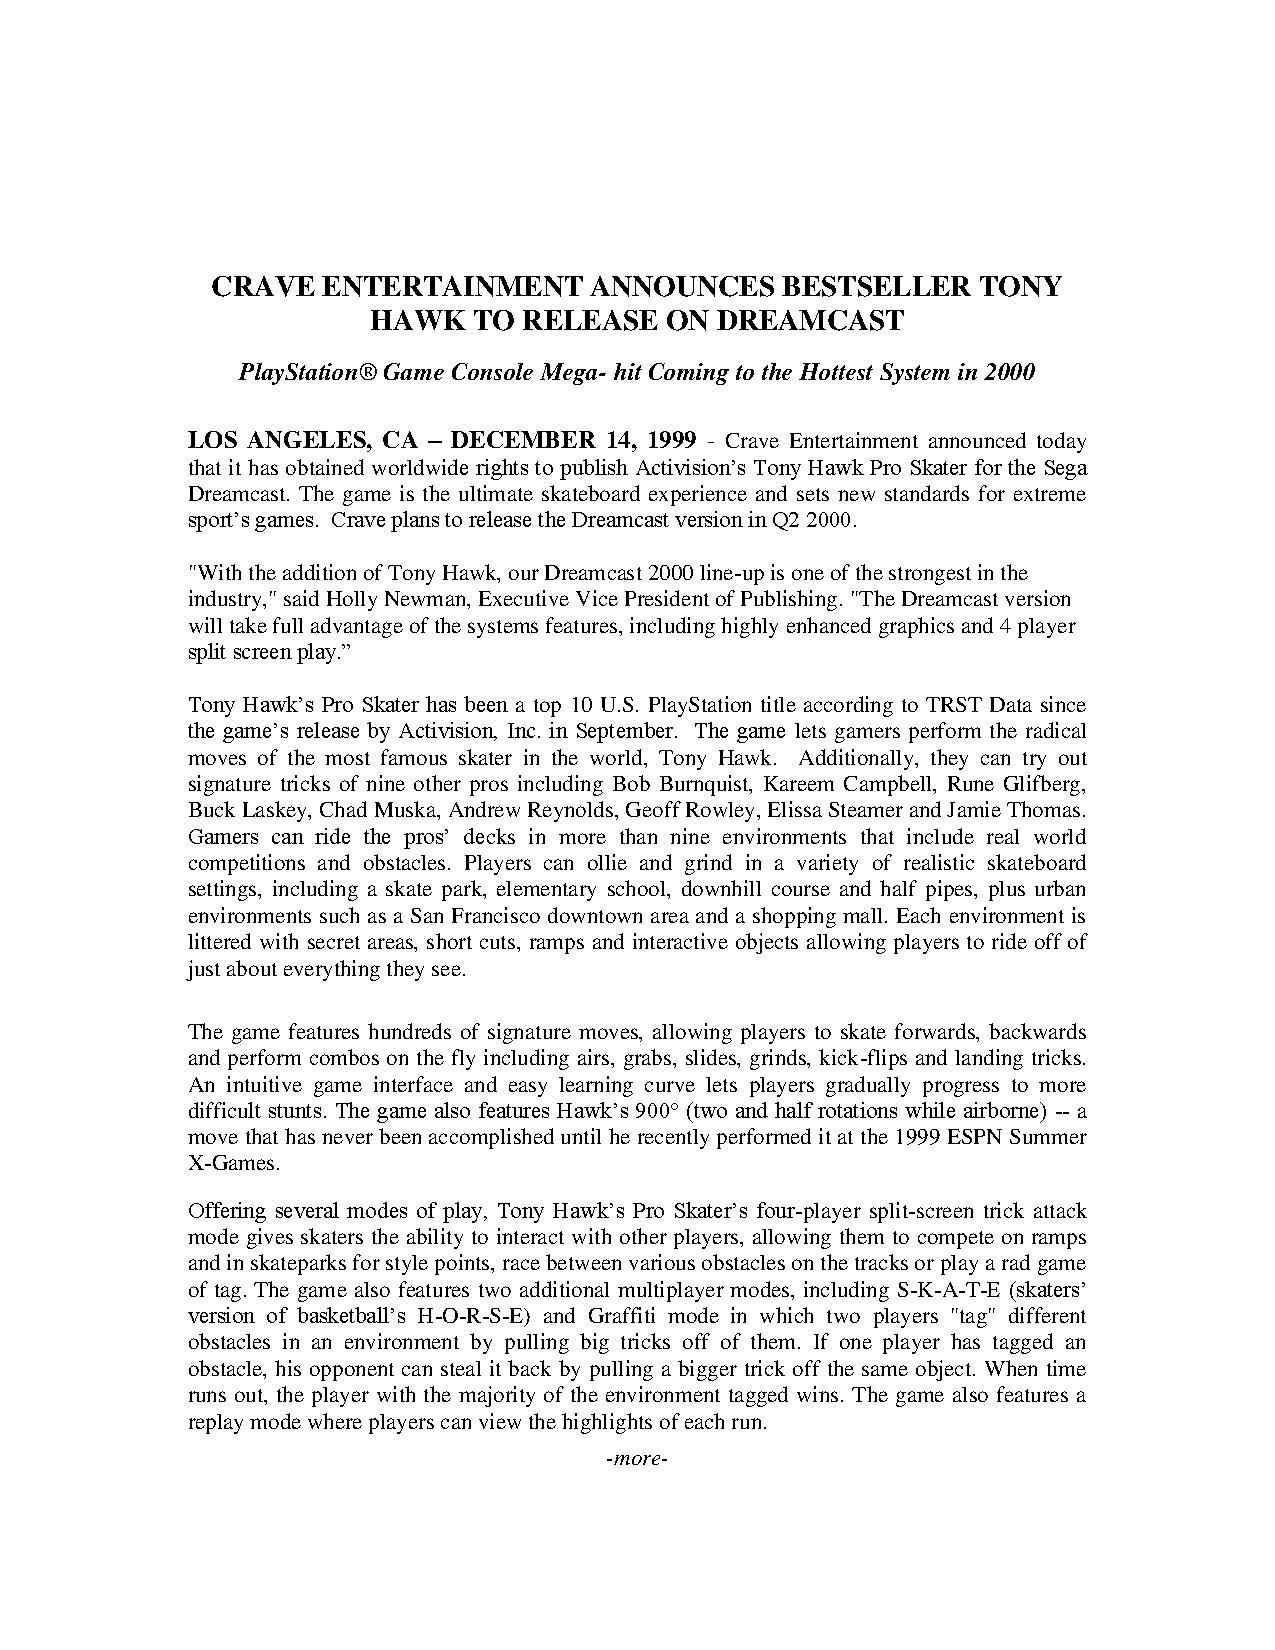 CraveEntertainment2000andBeyond THPS TH Announcement Release.pdf